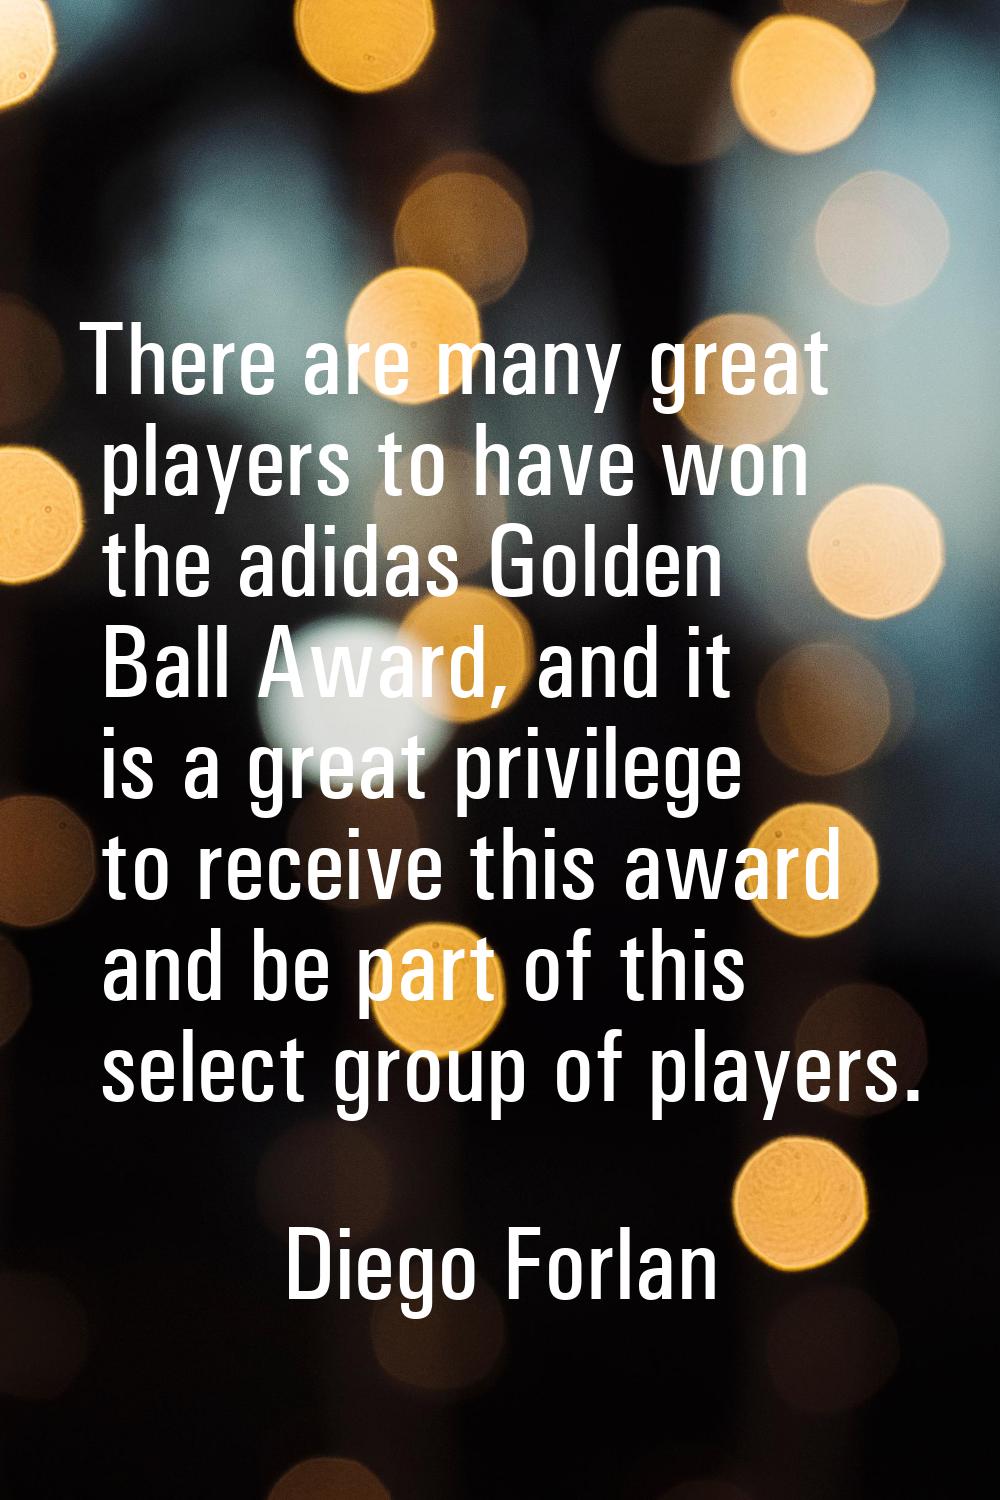 There are many great players to have won the adidas Golden Ball Award, and it is a great privilege 